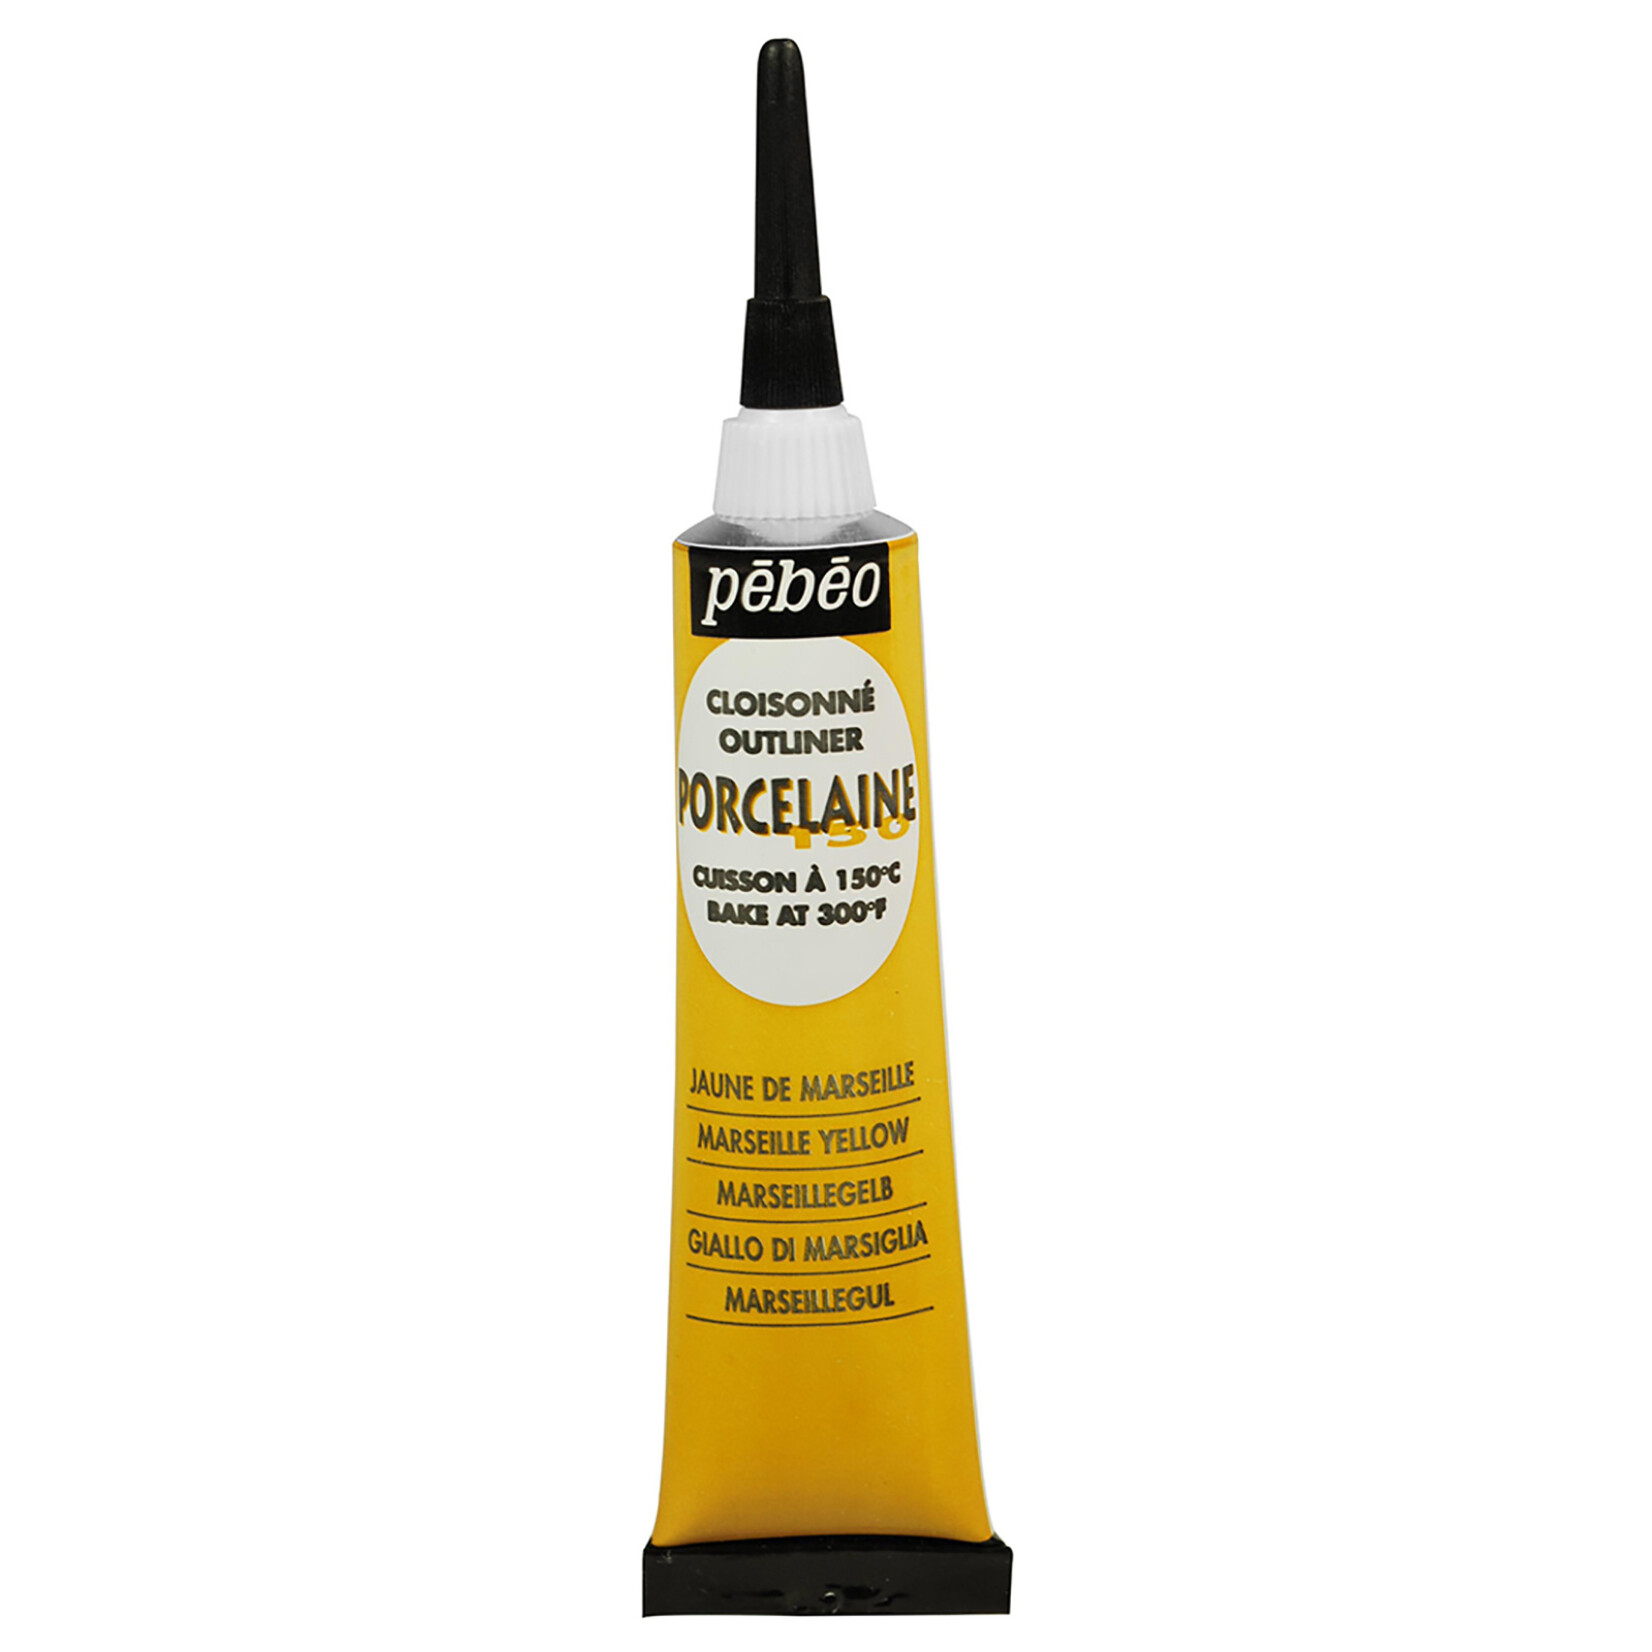 PEBEO PORCELAINE OUTLINER 20ML MARSEILLE YELLOW